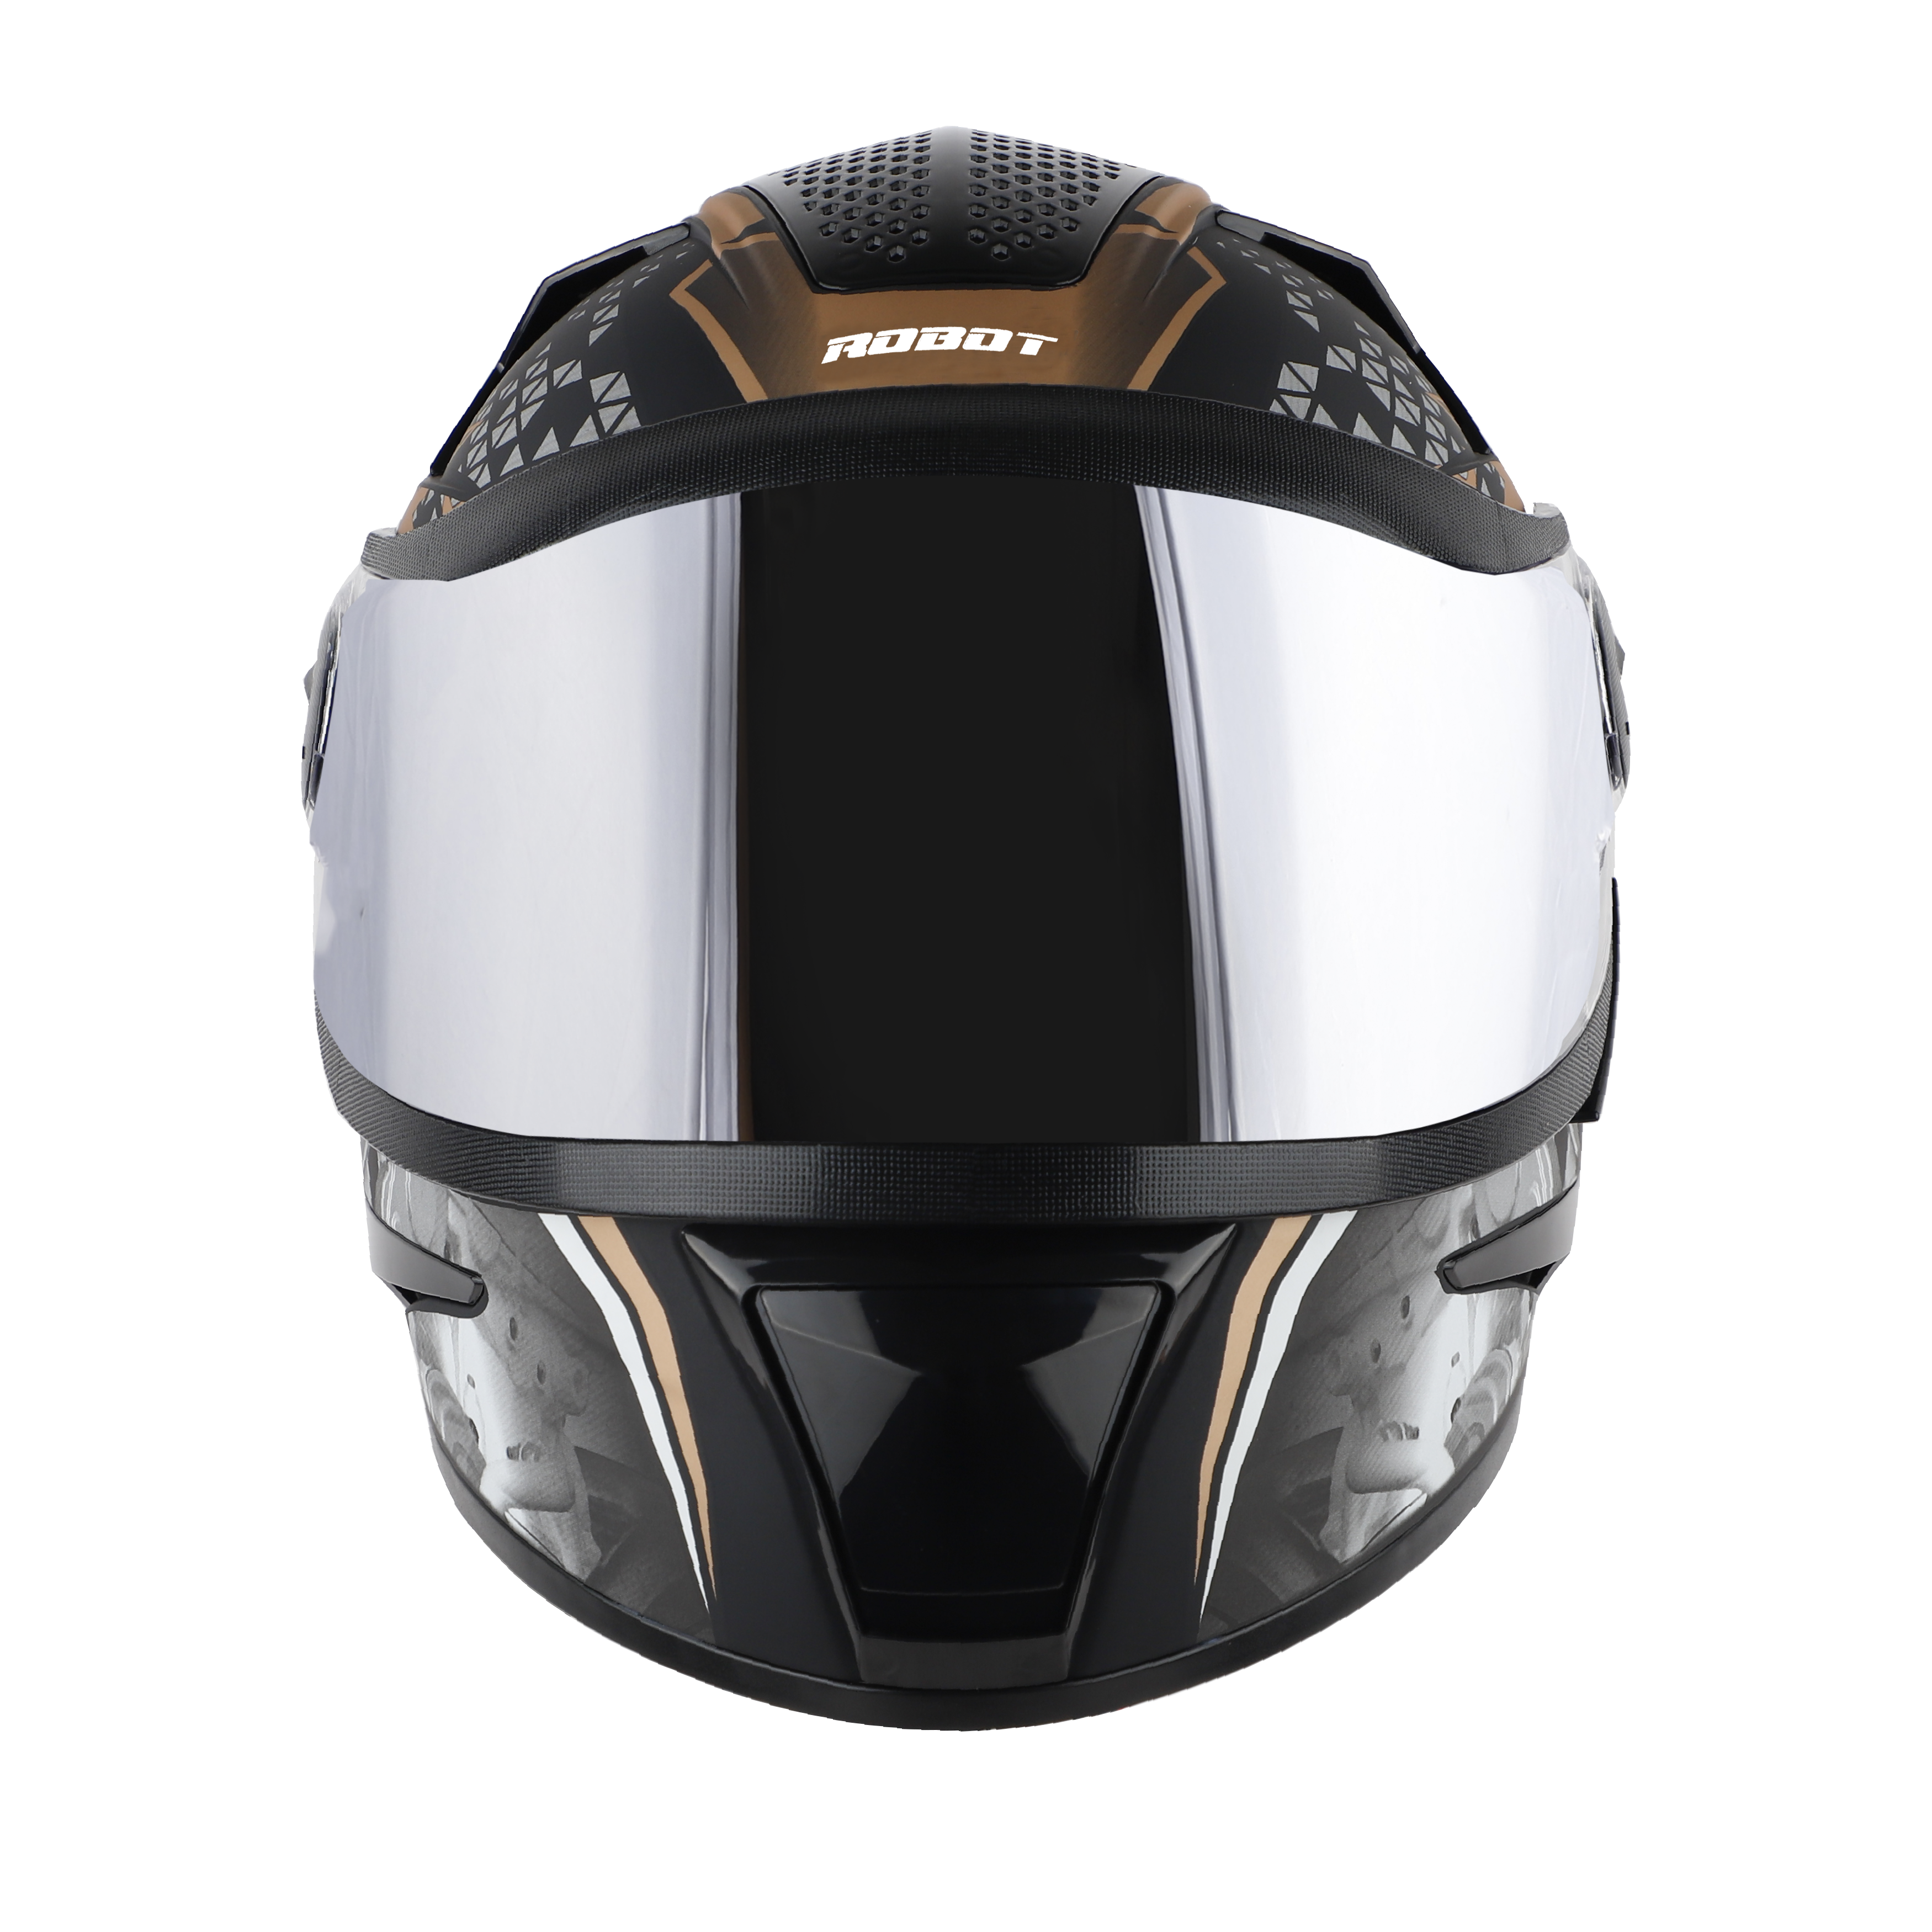 Steelbird SBH-17 Ignimeter Full Face ISI Certified Graphic Helmet (Glossy Black Gold With Chrome Silver Visor)